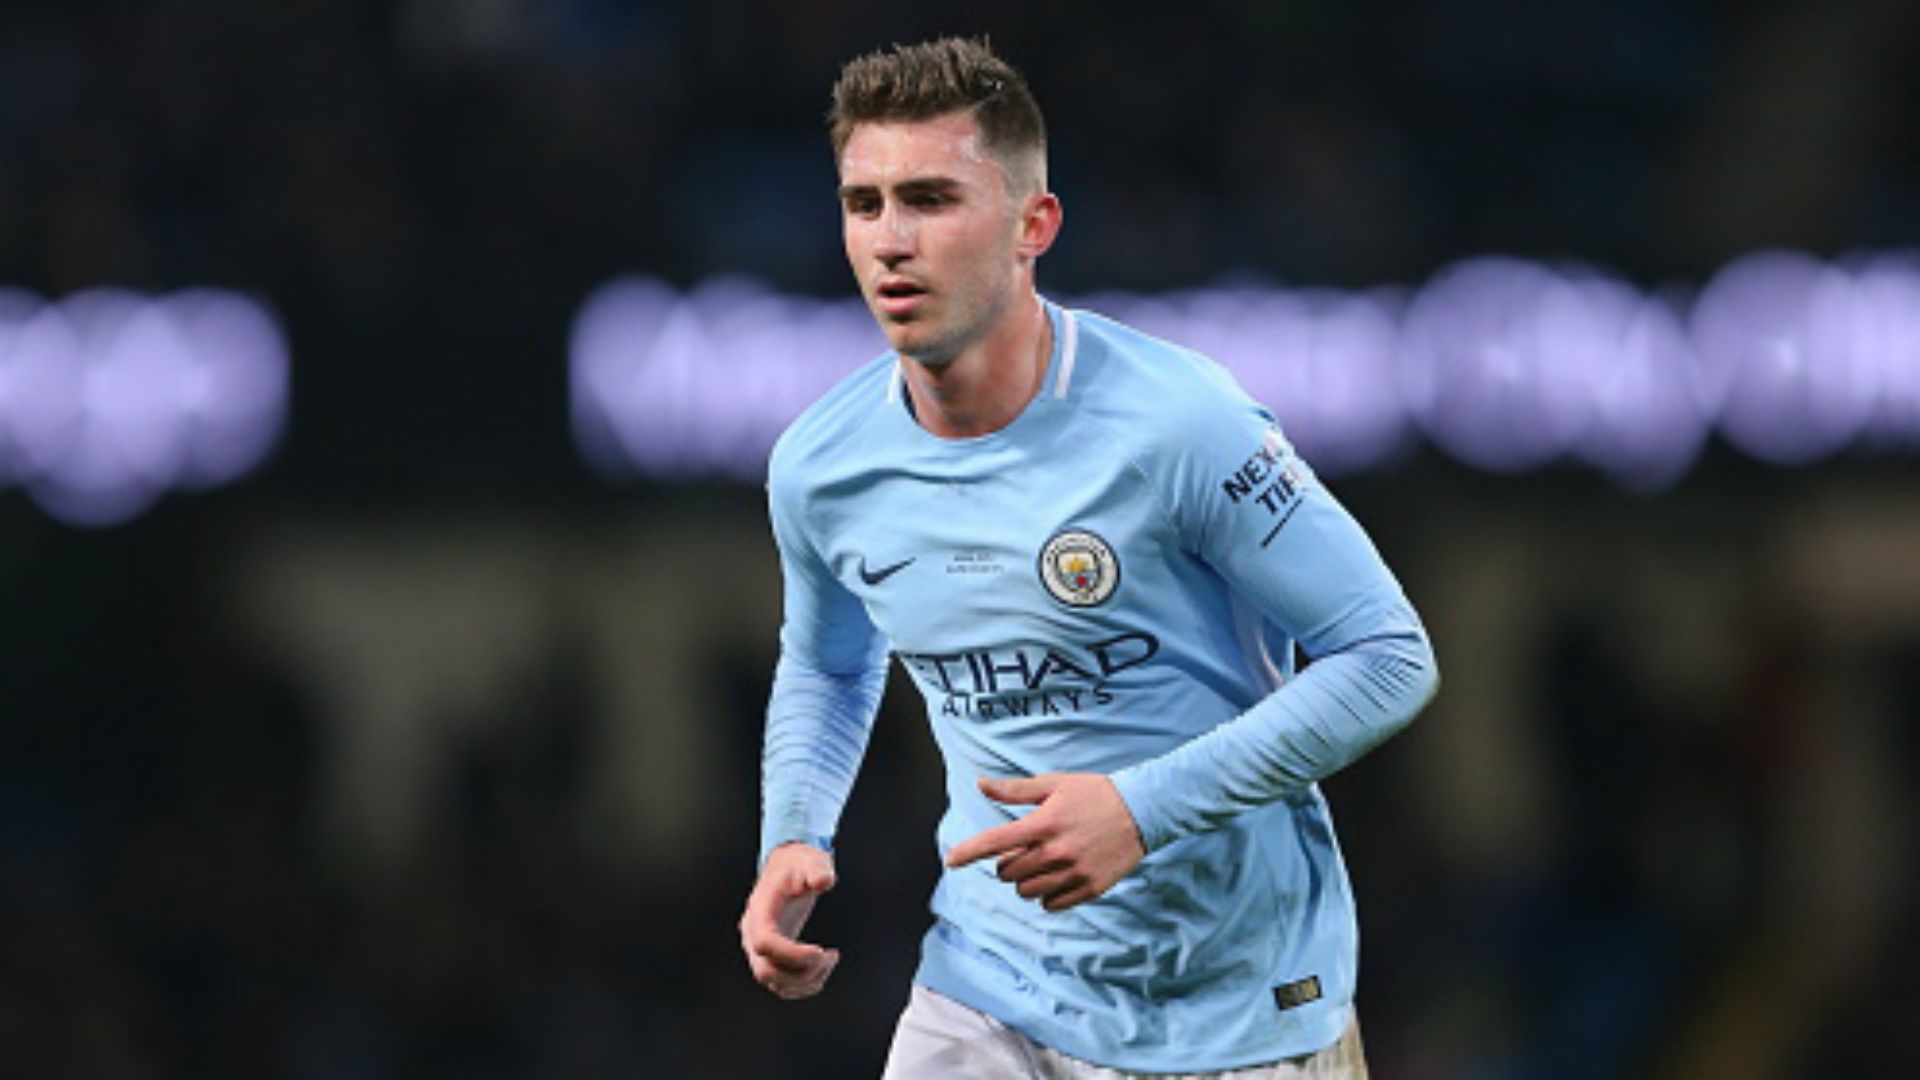 I was right to turn down Man City move in says Laporte